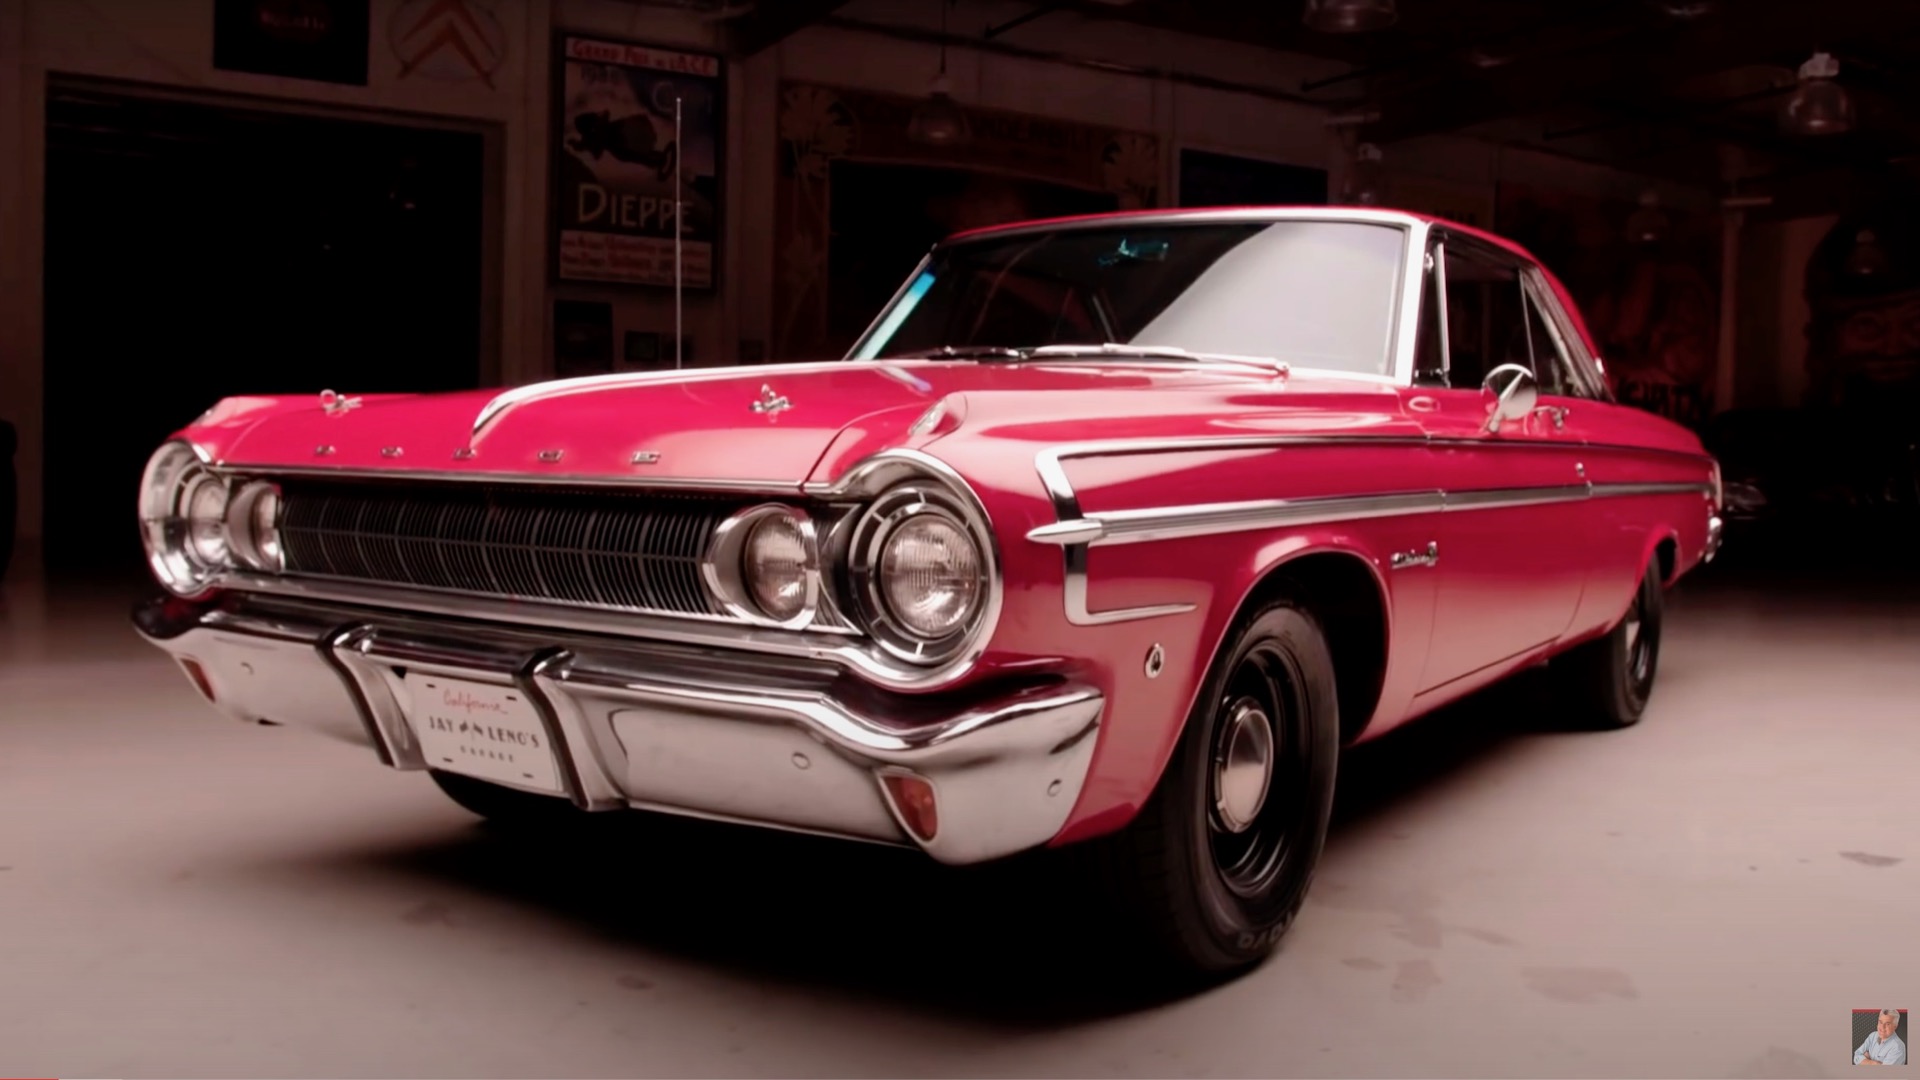 Jay Leno drives a Dodge Polara, one of the earliest muscle cars Auto Recent